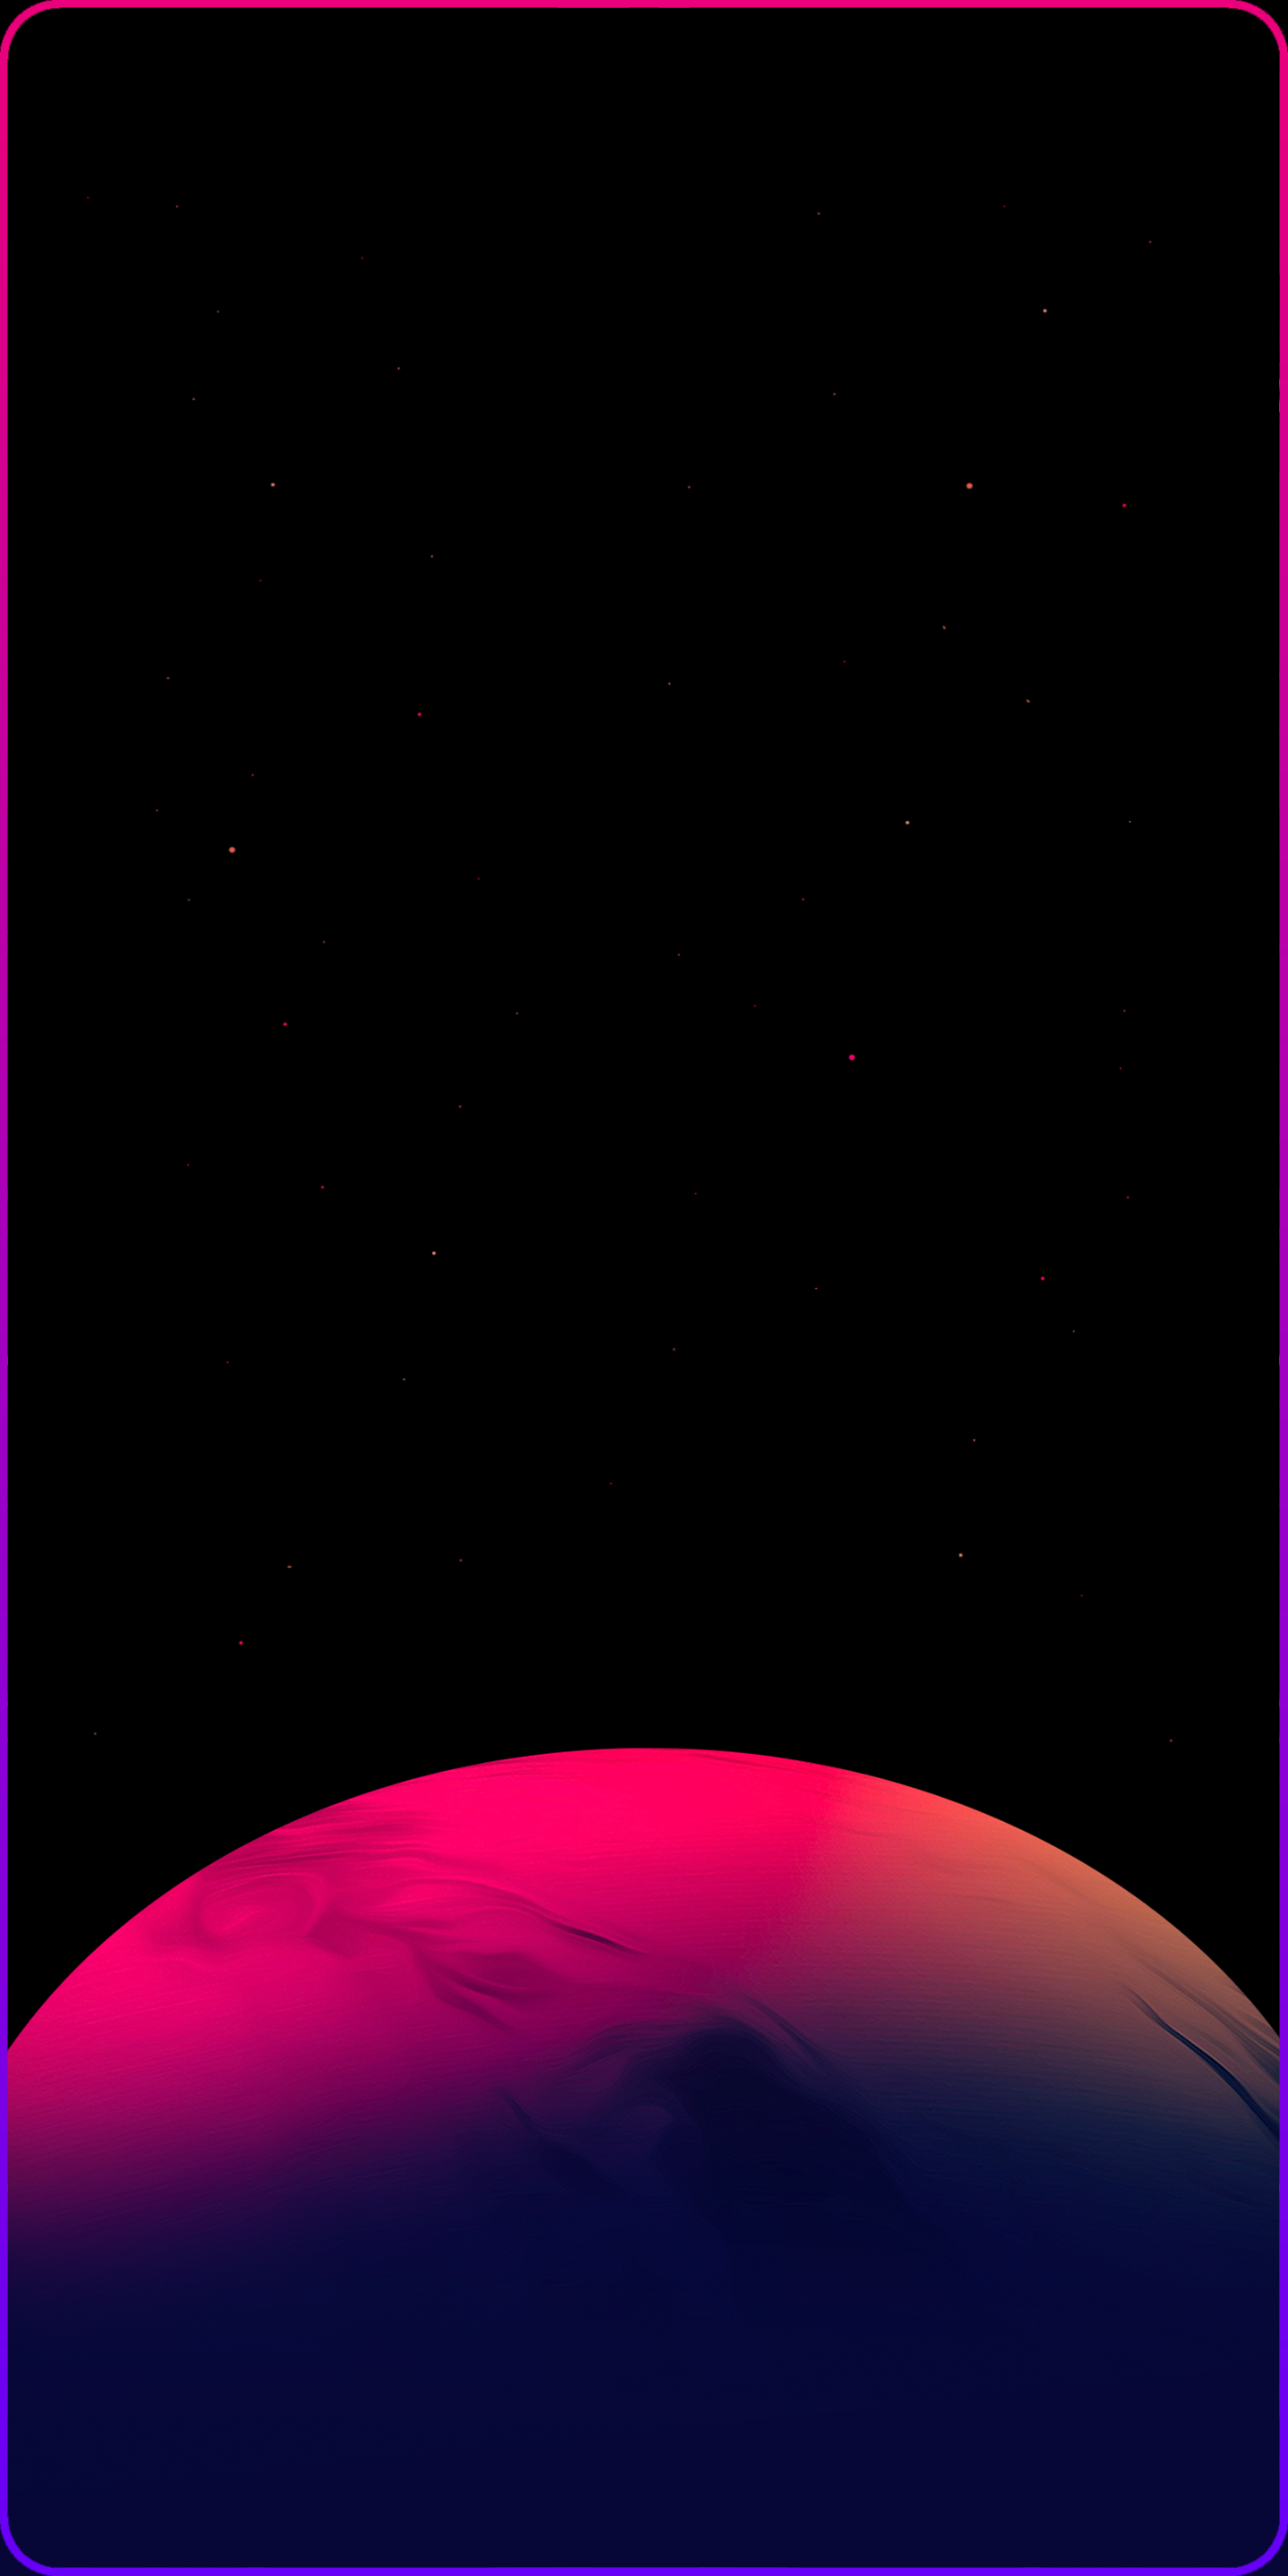 AR7 World (A Wallpaper I Made A Few Months Ago For R Amoledbackground But Never Posted Here. Enjoy!) [1440x2880]